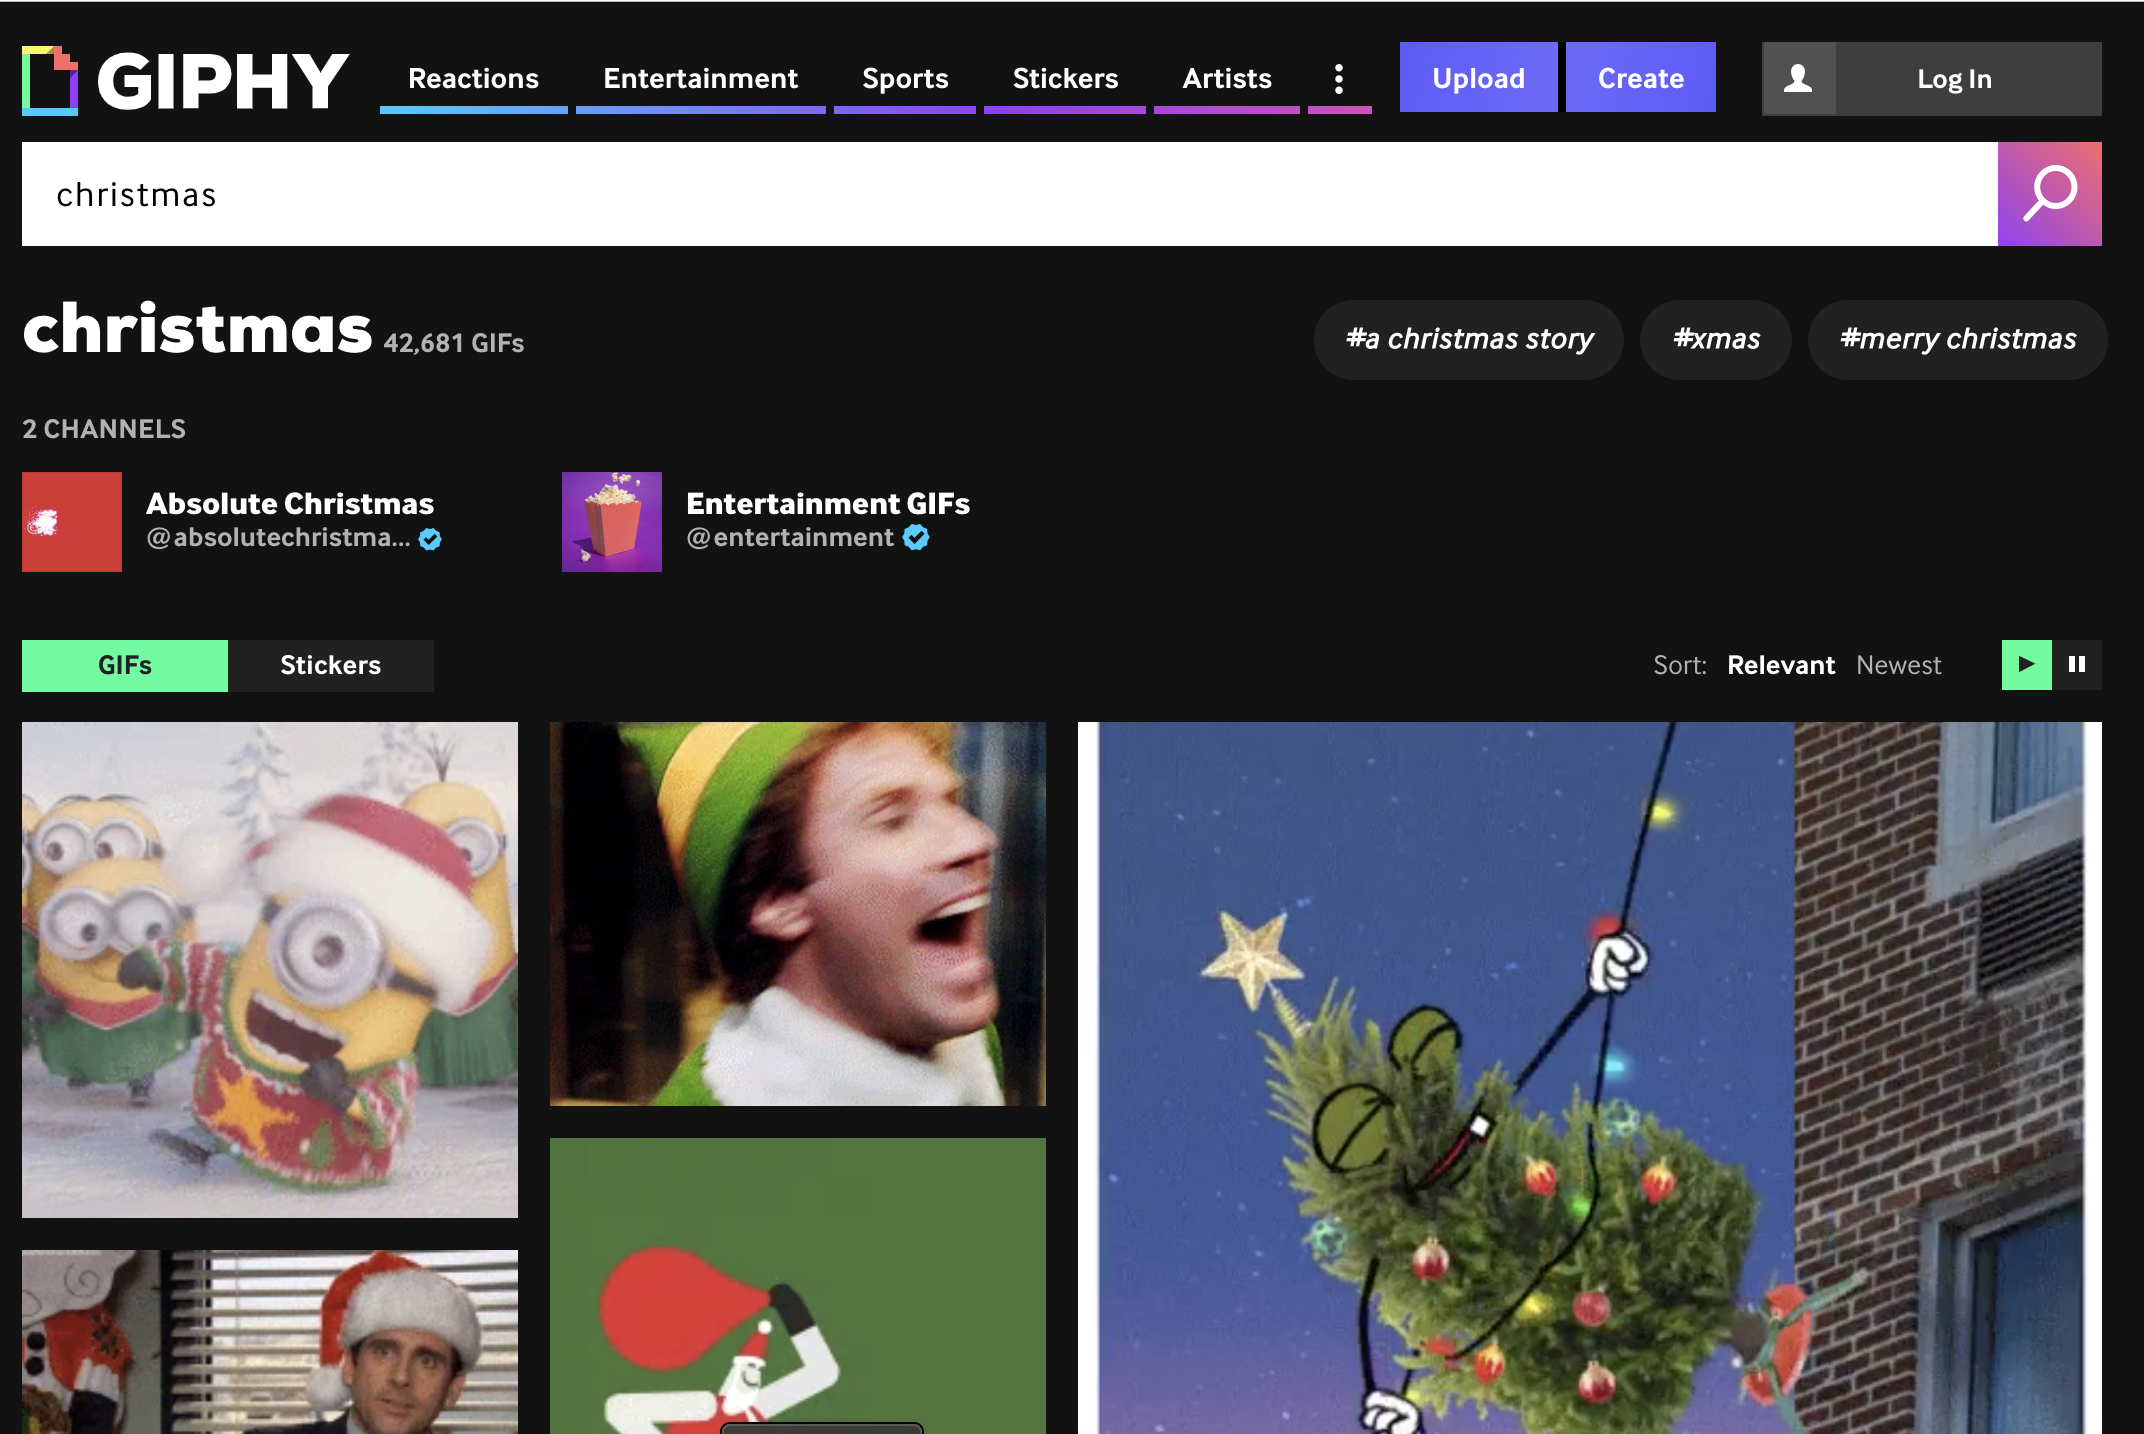 Giphy search for &ldquo;christmas&rdquo;